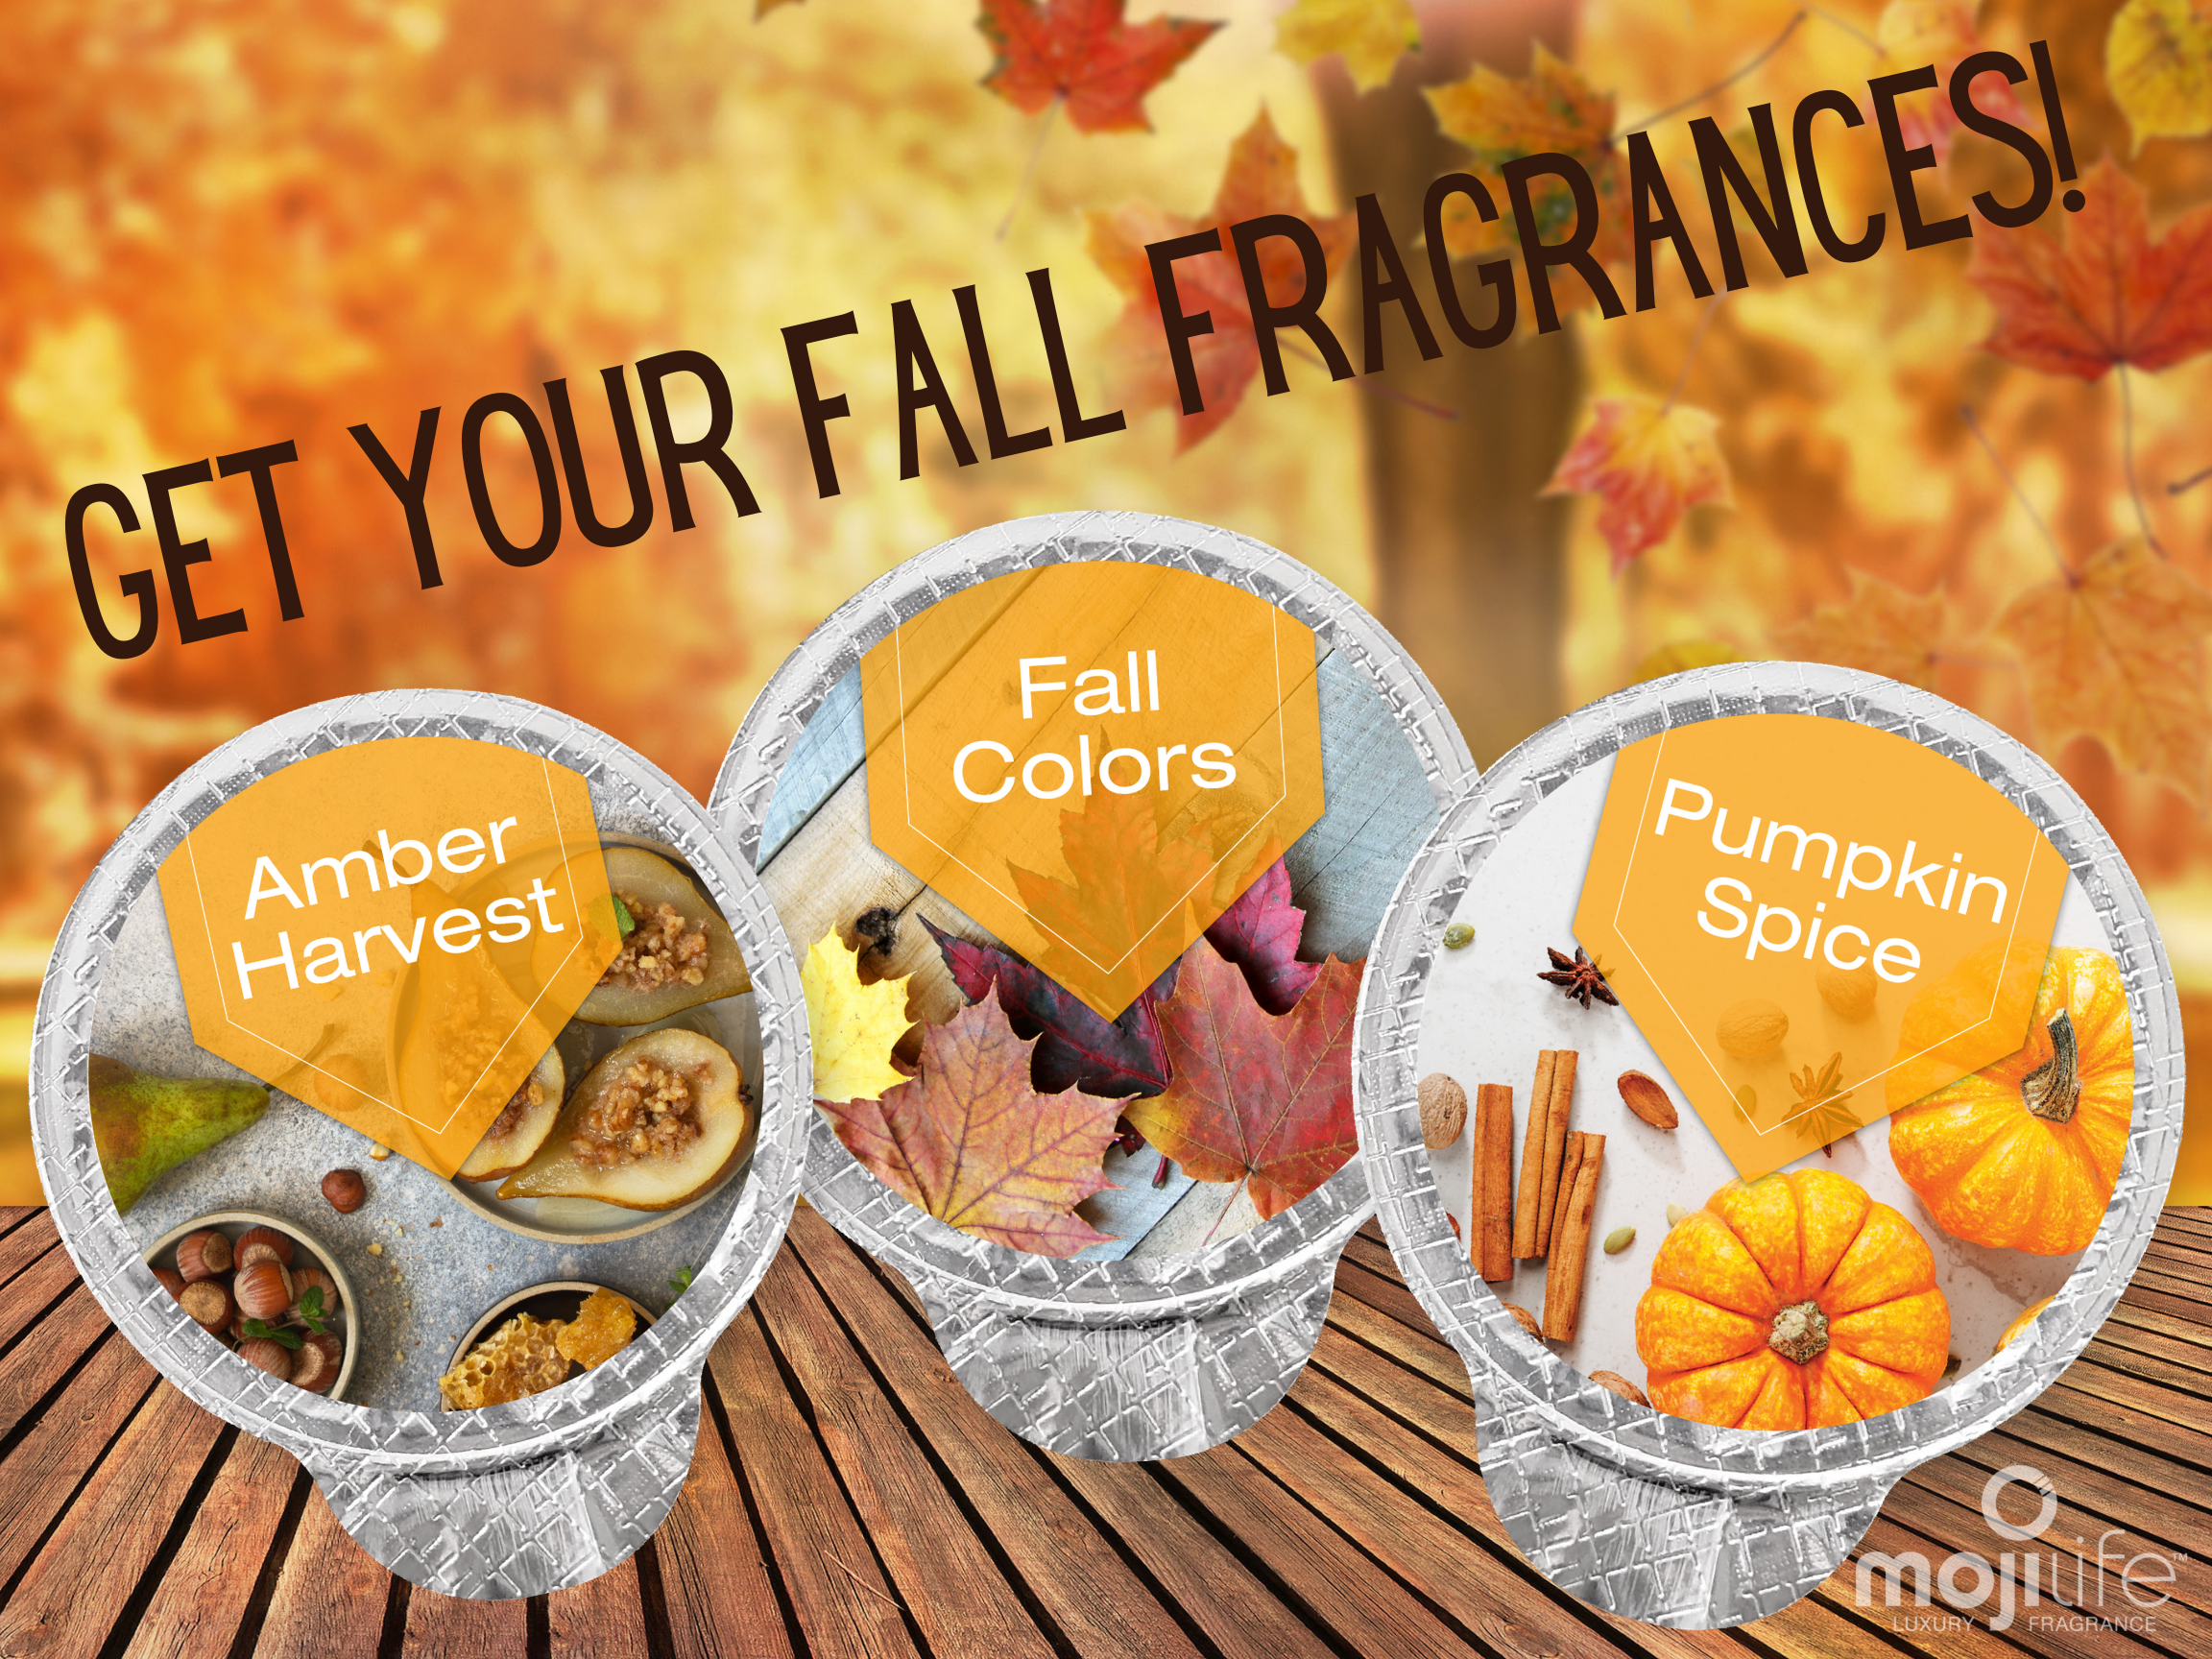 Last chance to get your Fall Fragrances!